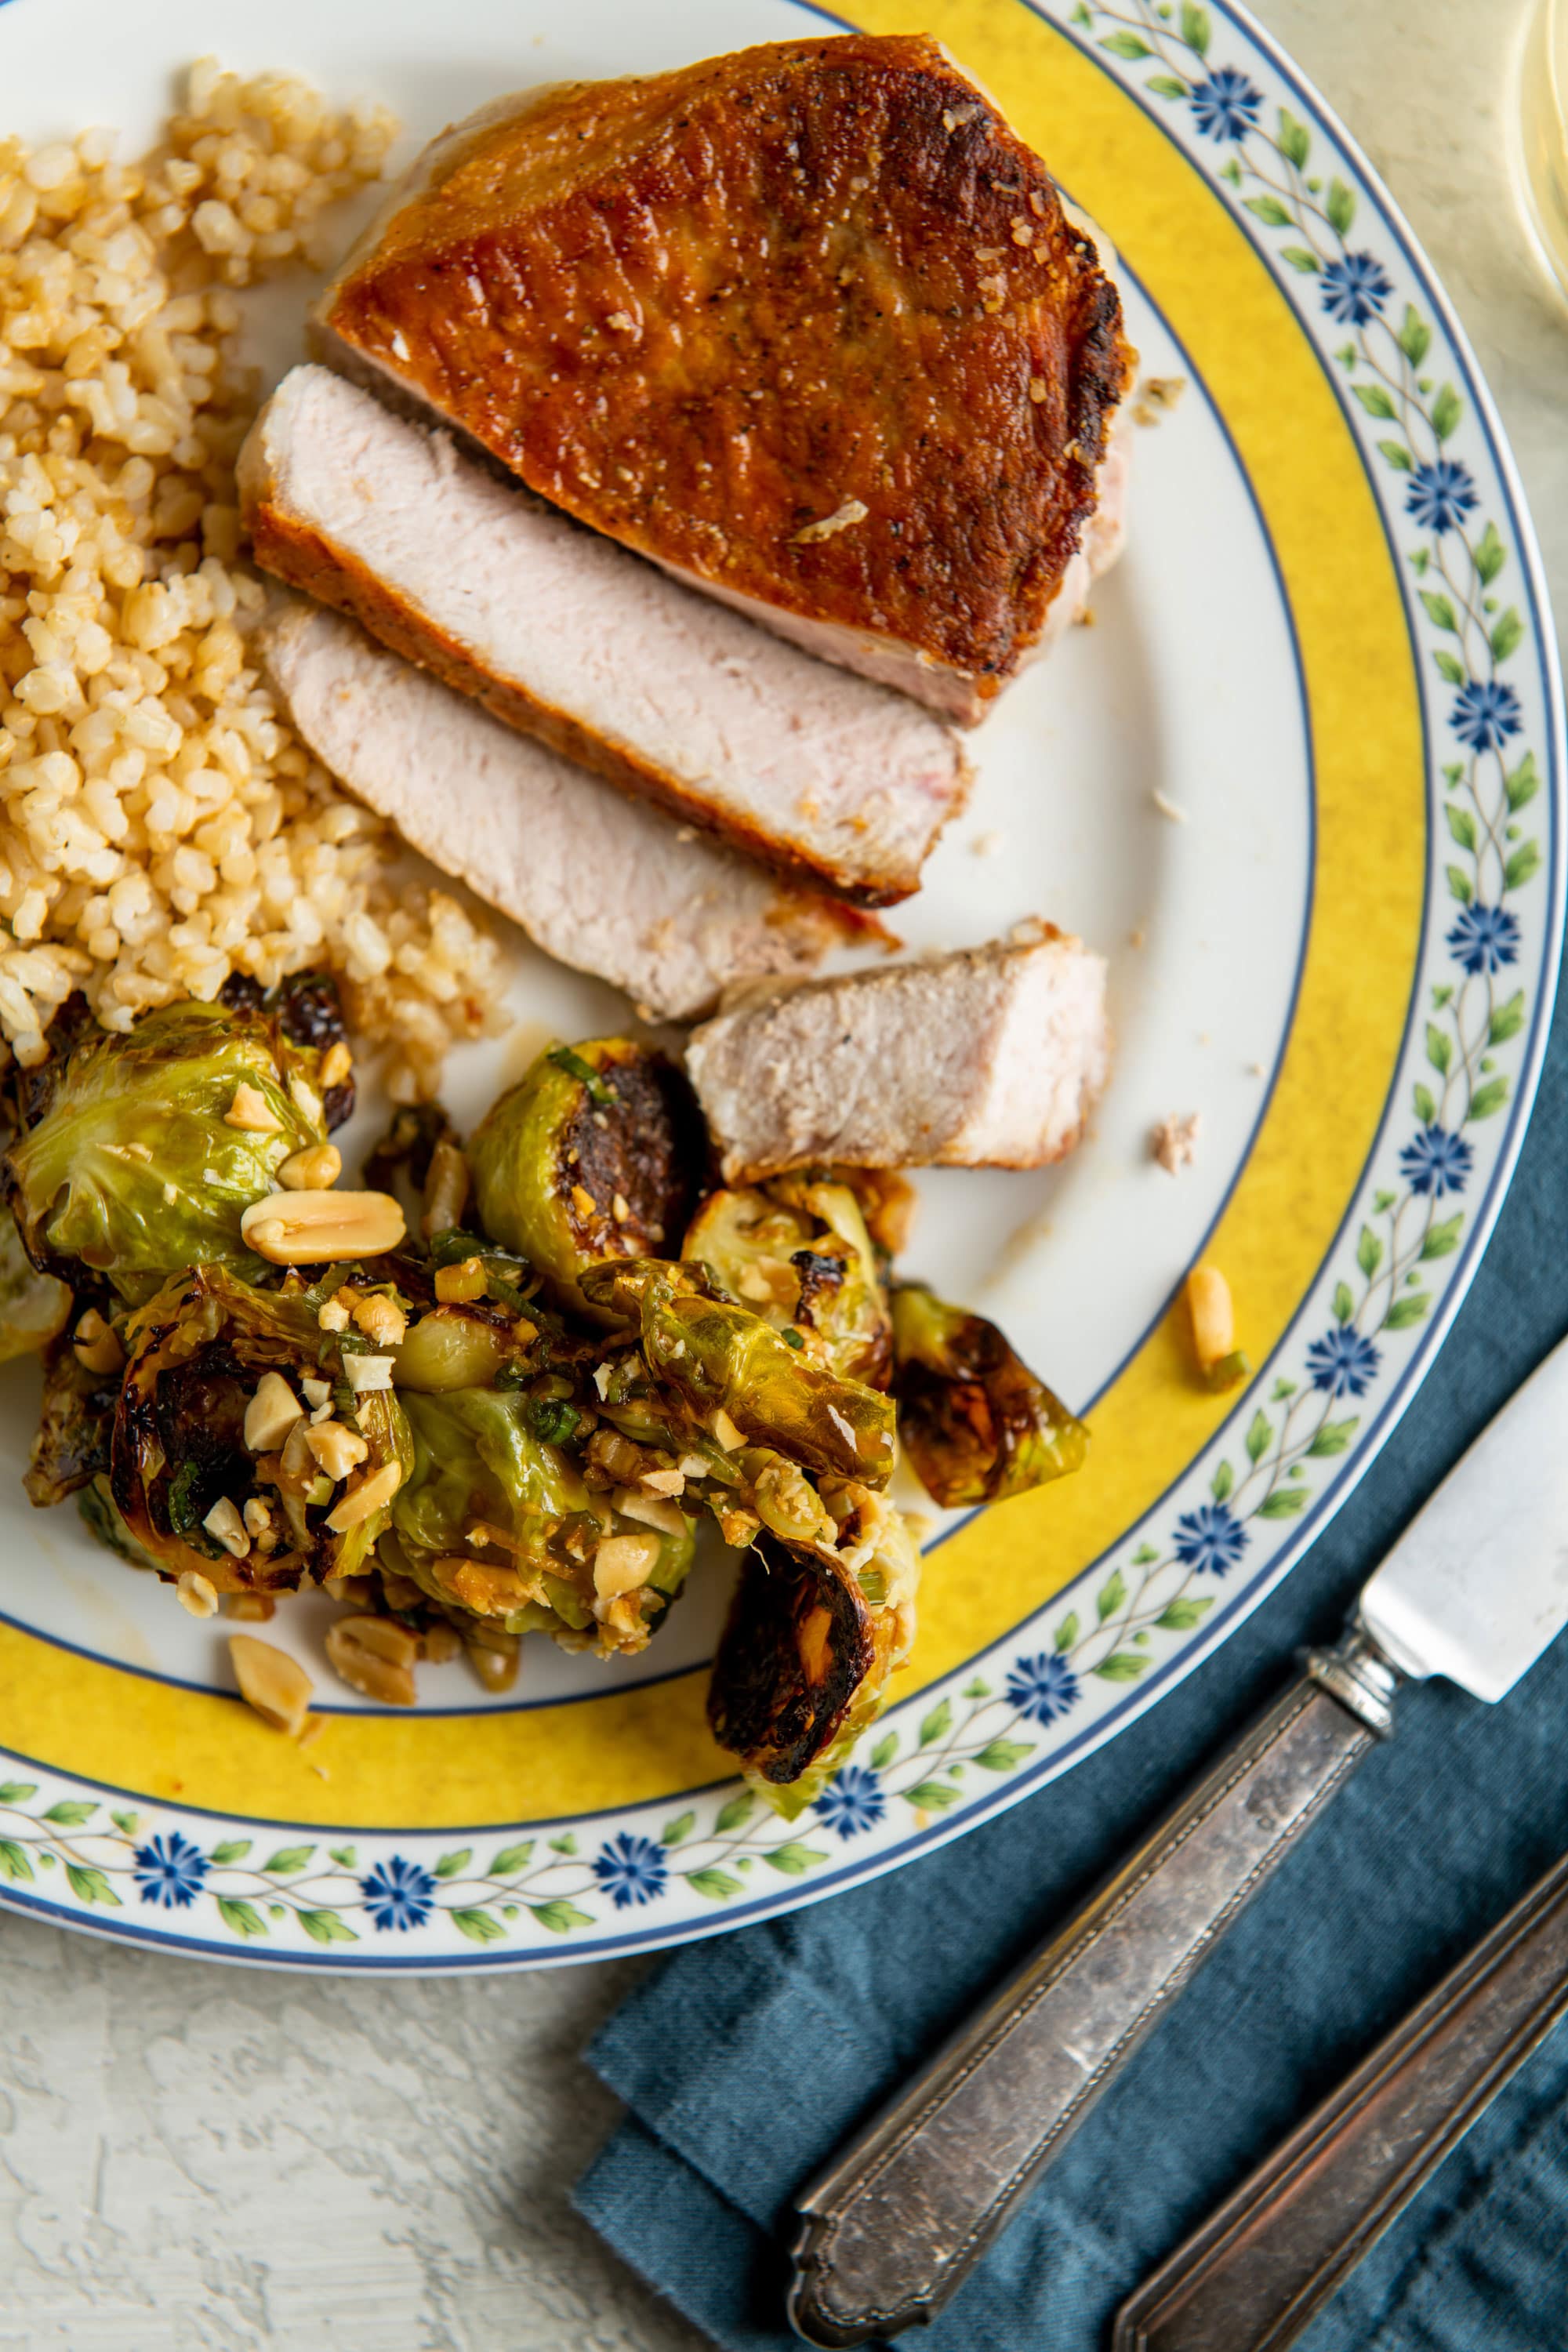 Kung Pao Brussels Sprouts next to sliced pork chop.